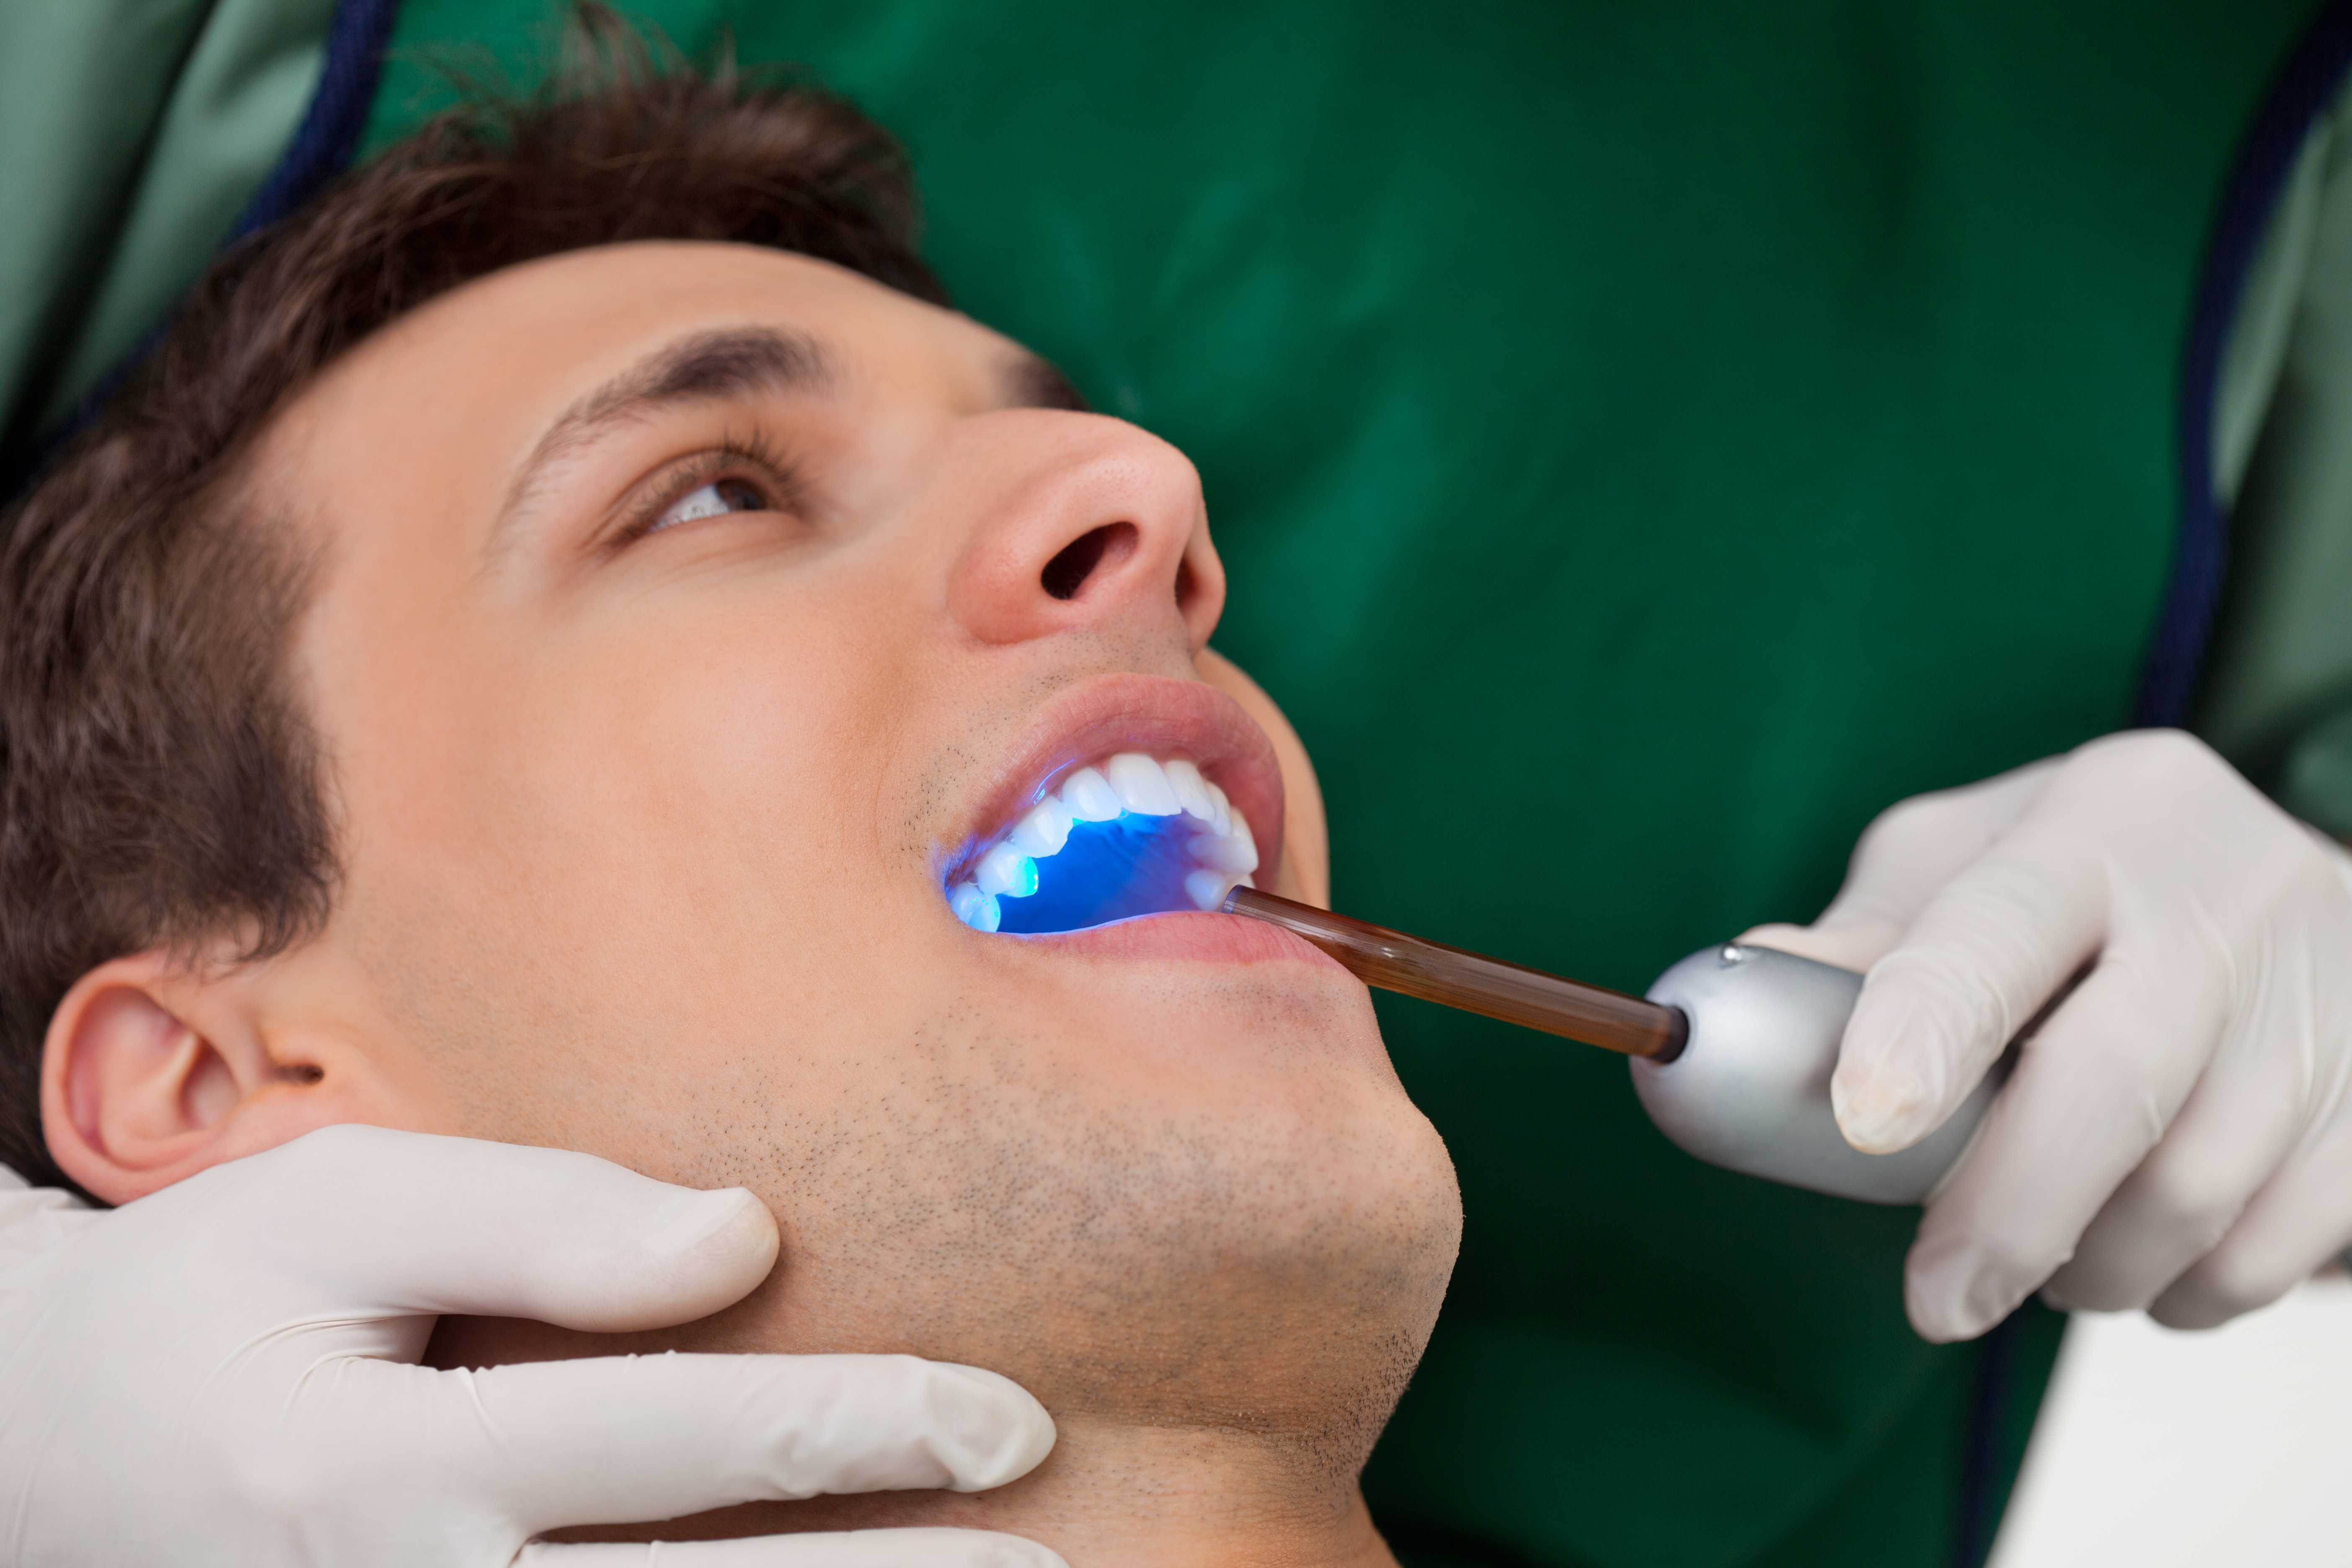 How an orthodontist can straighten adults’ teeth – in secret